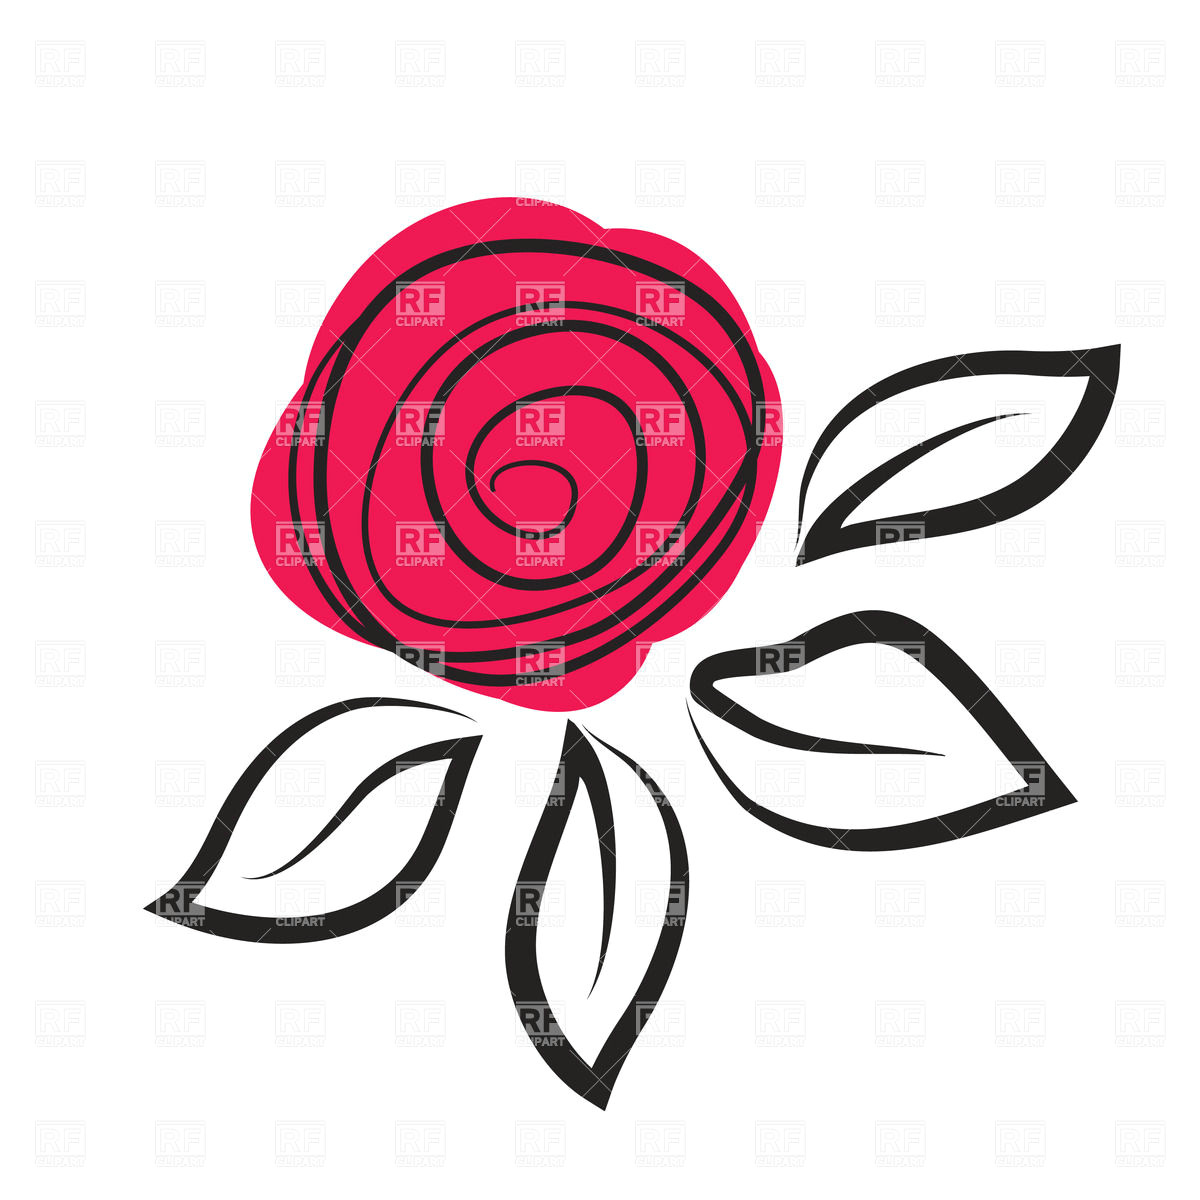 abstract rose flower vector image vector illustration of plants and animals a c mcherevan 27796 click to zoom